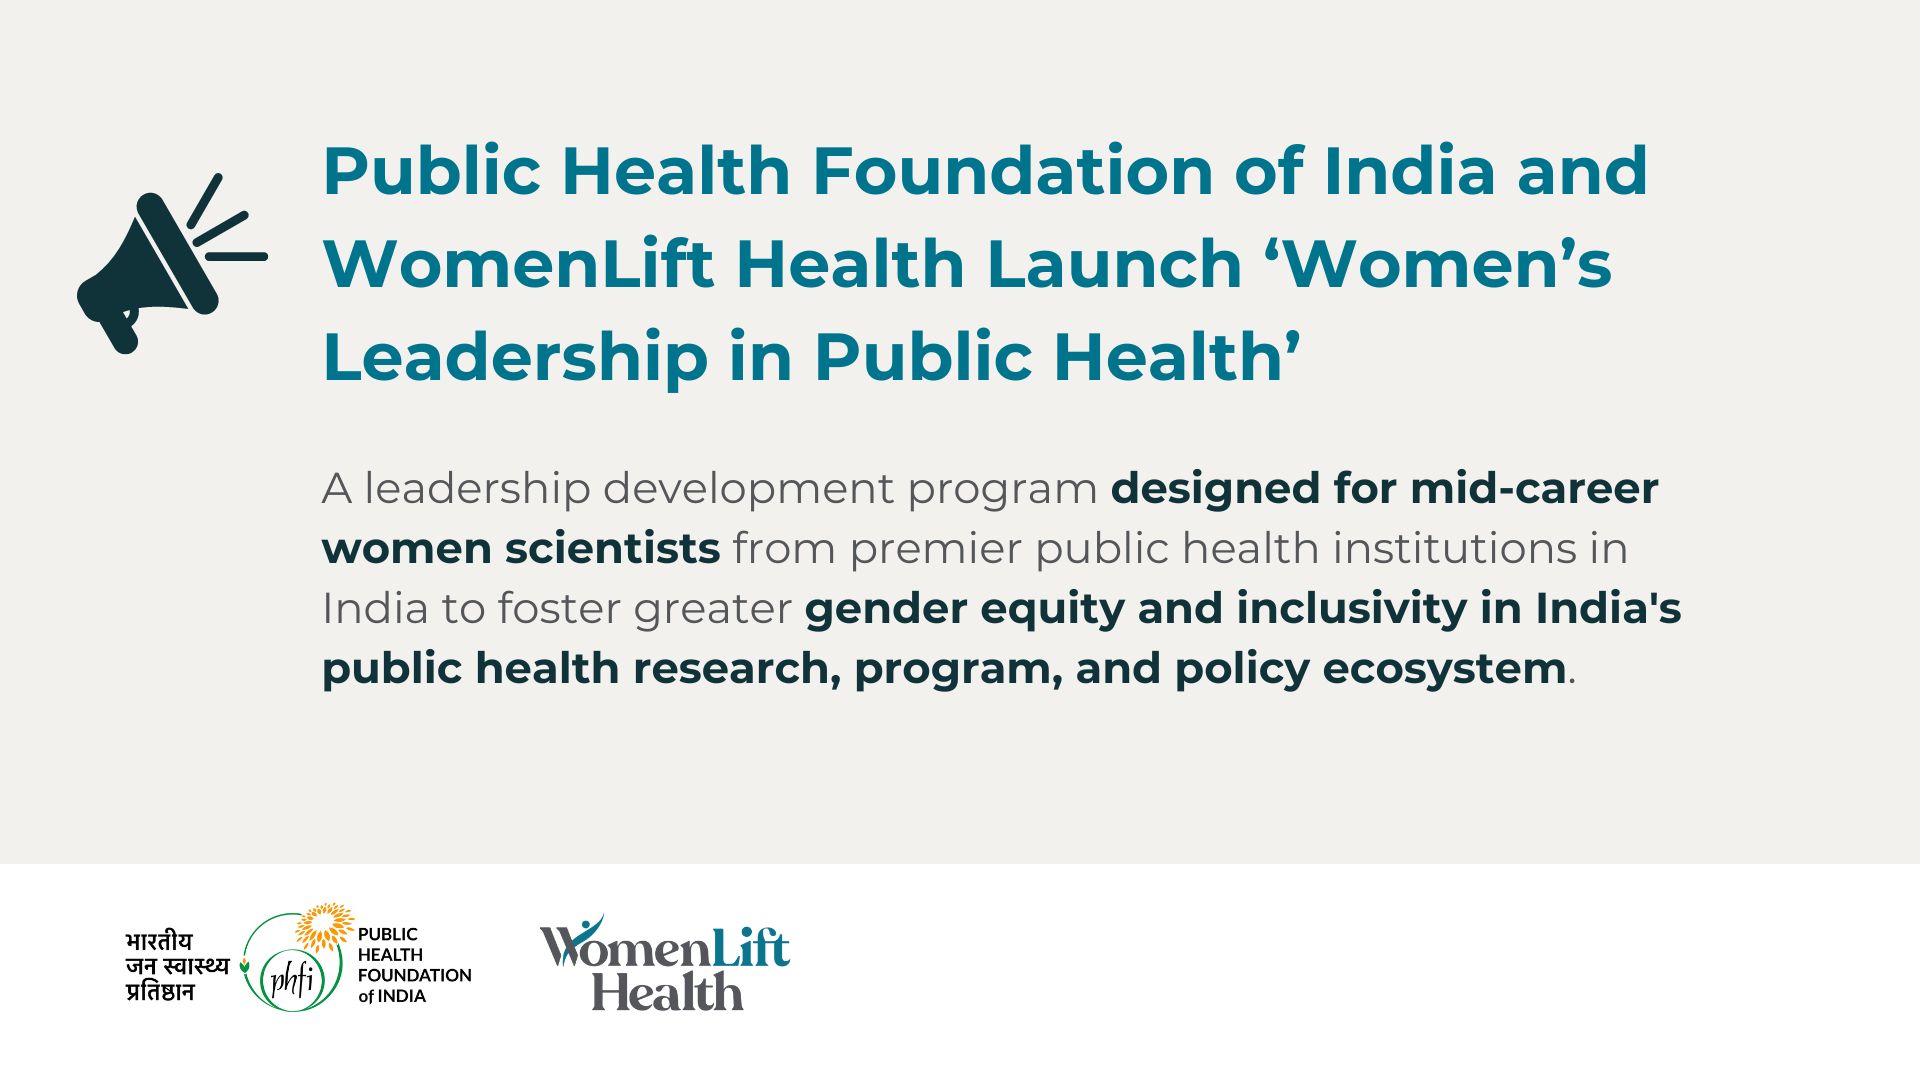 Public Health Foundation of India and WomenLift Health Launch ‘Women’s Leadership in Public Health,’ a Collaboration to Drive Gender Equity in Public Health in India